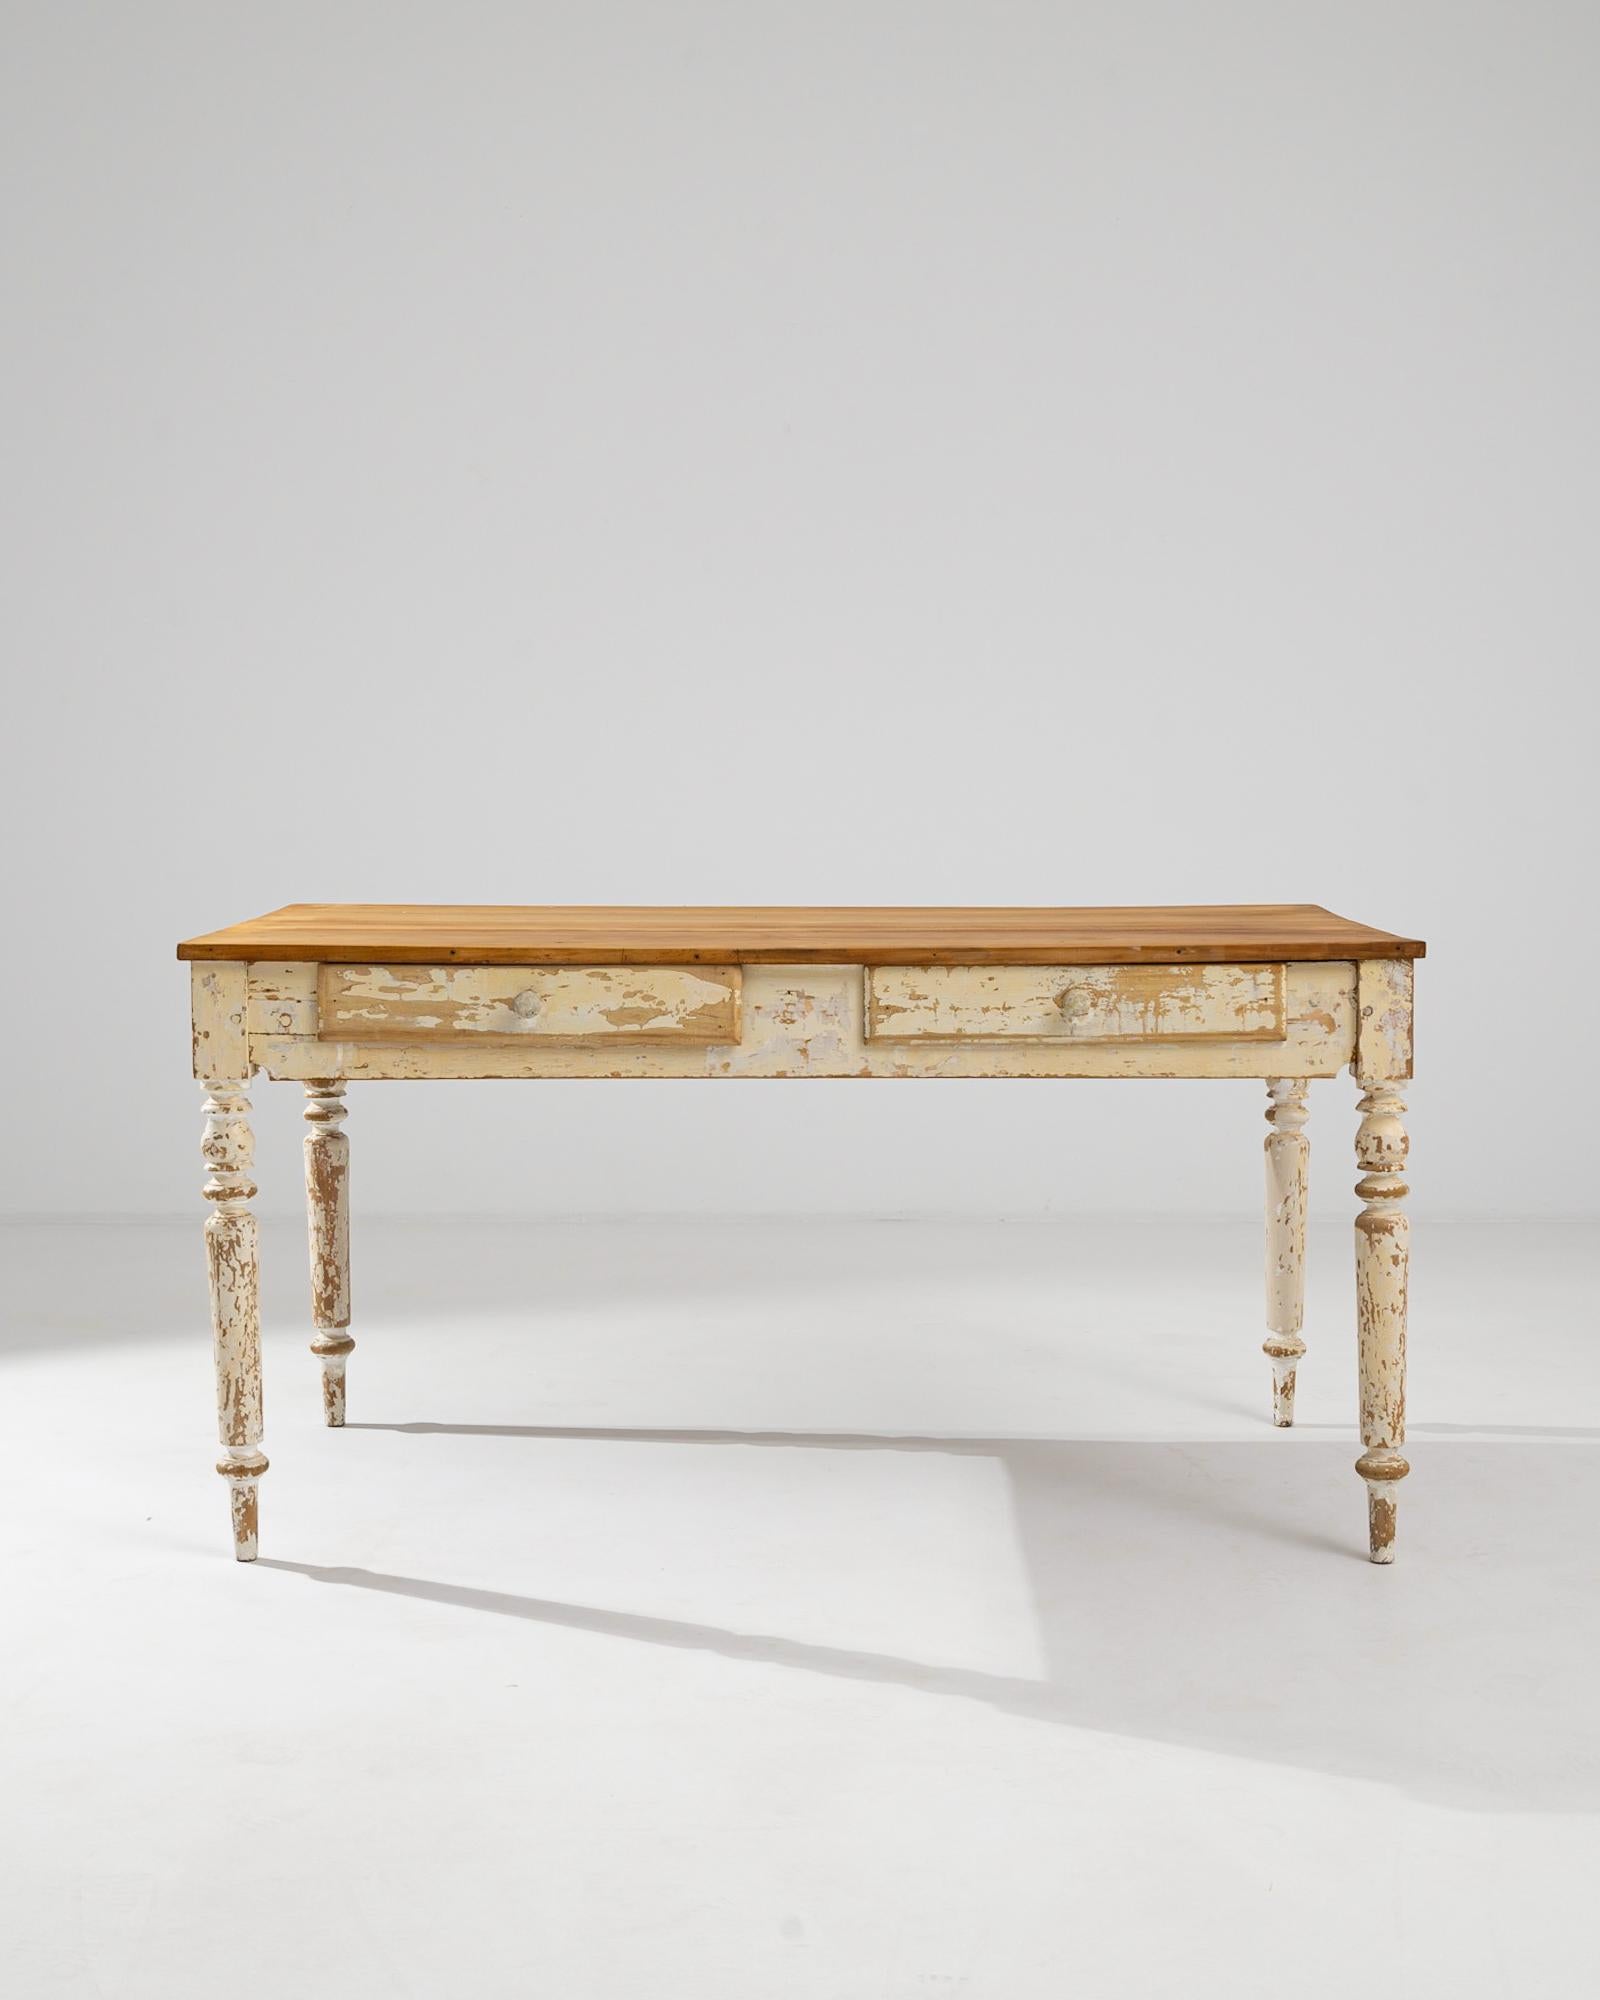 A wooden table from 1900s France. This elegantly simple table is composed of an expansive hard wood top and two sliding storage drawers. A pleasant patina has spread across its delicately lathed legs, indicating its long history. Brimming with a